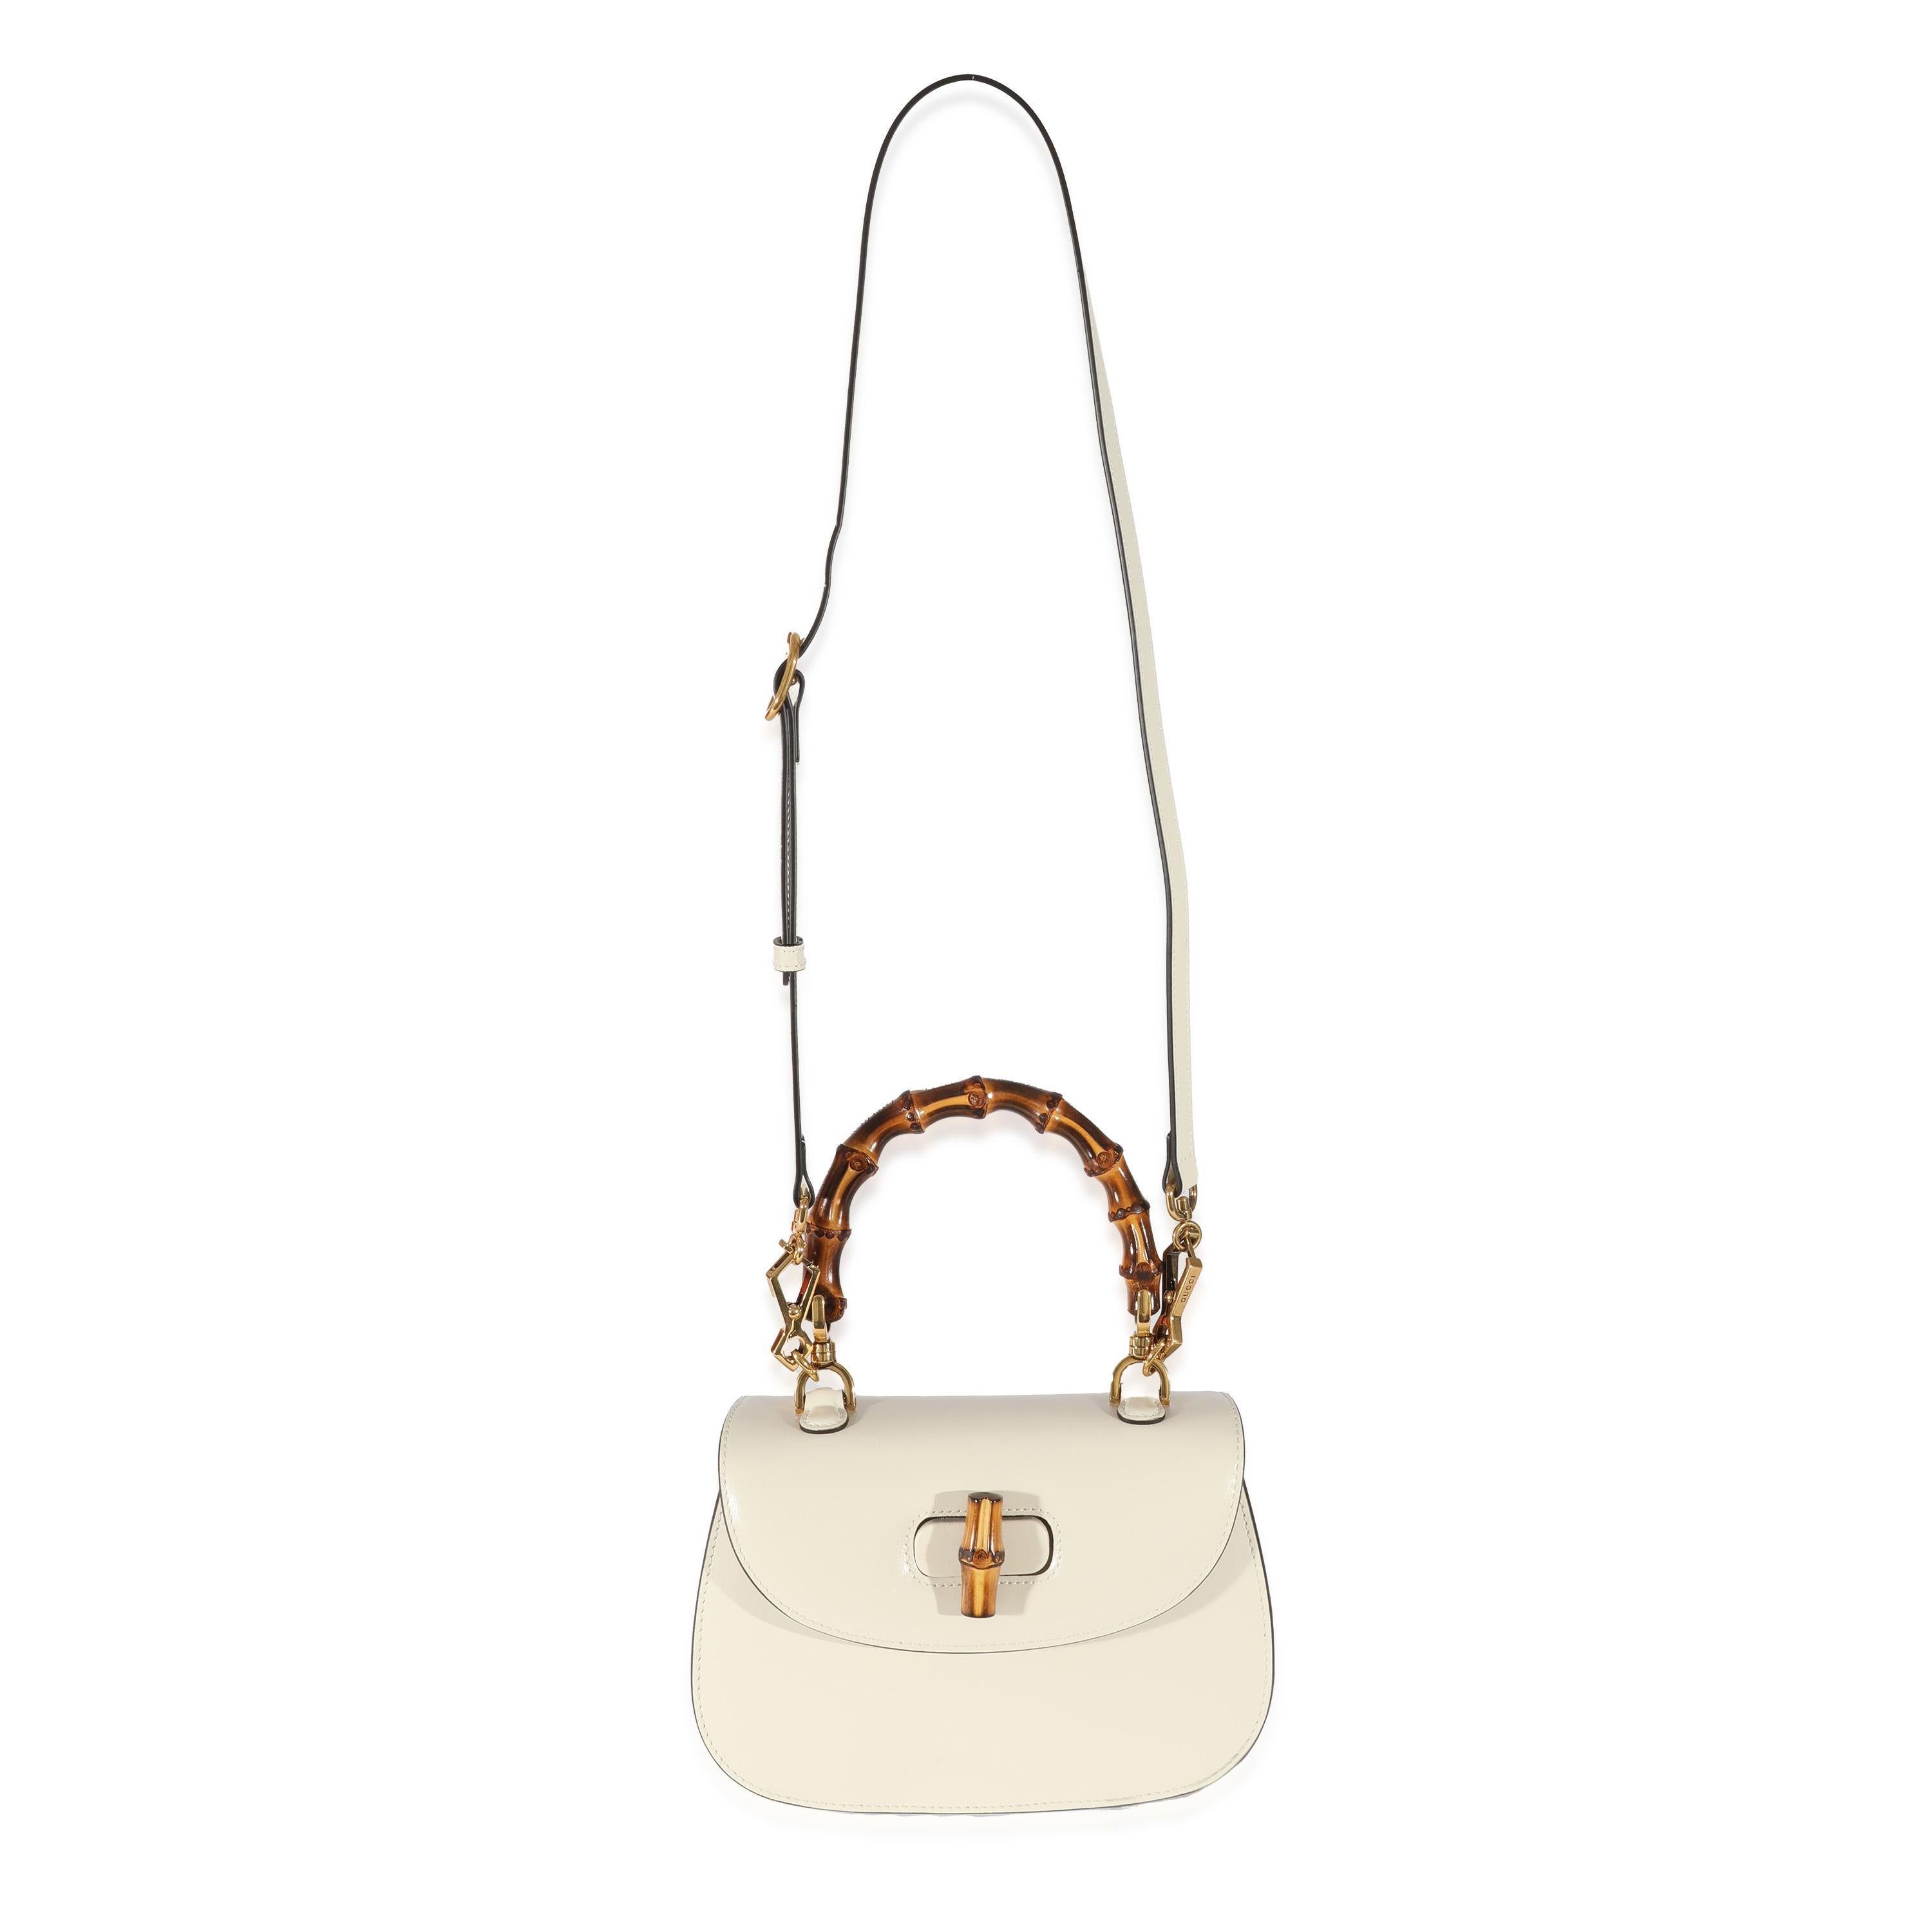 Listing Title: Gucci White Leather Small 1947 Bamboo Top Handle
SKU: 129291
MSRP: 4200.00
Condition: Pre-owned 
Handbag Condition: Excellent
Condition Comments: Excellent Condition. Interior light scuffing and marks.
Brand: Gucci
Model: 1947 Bamboo